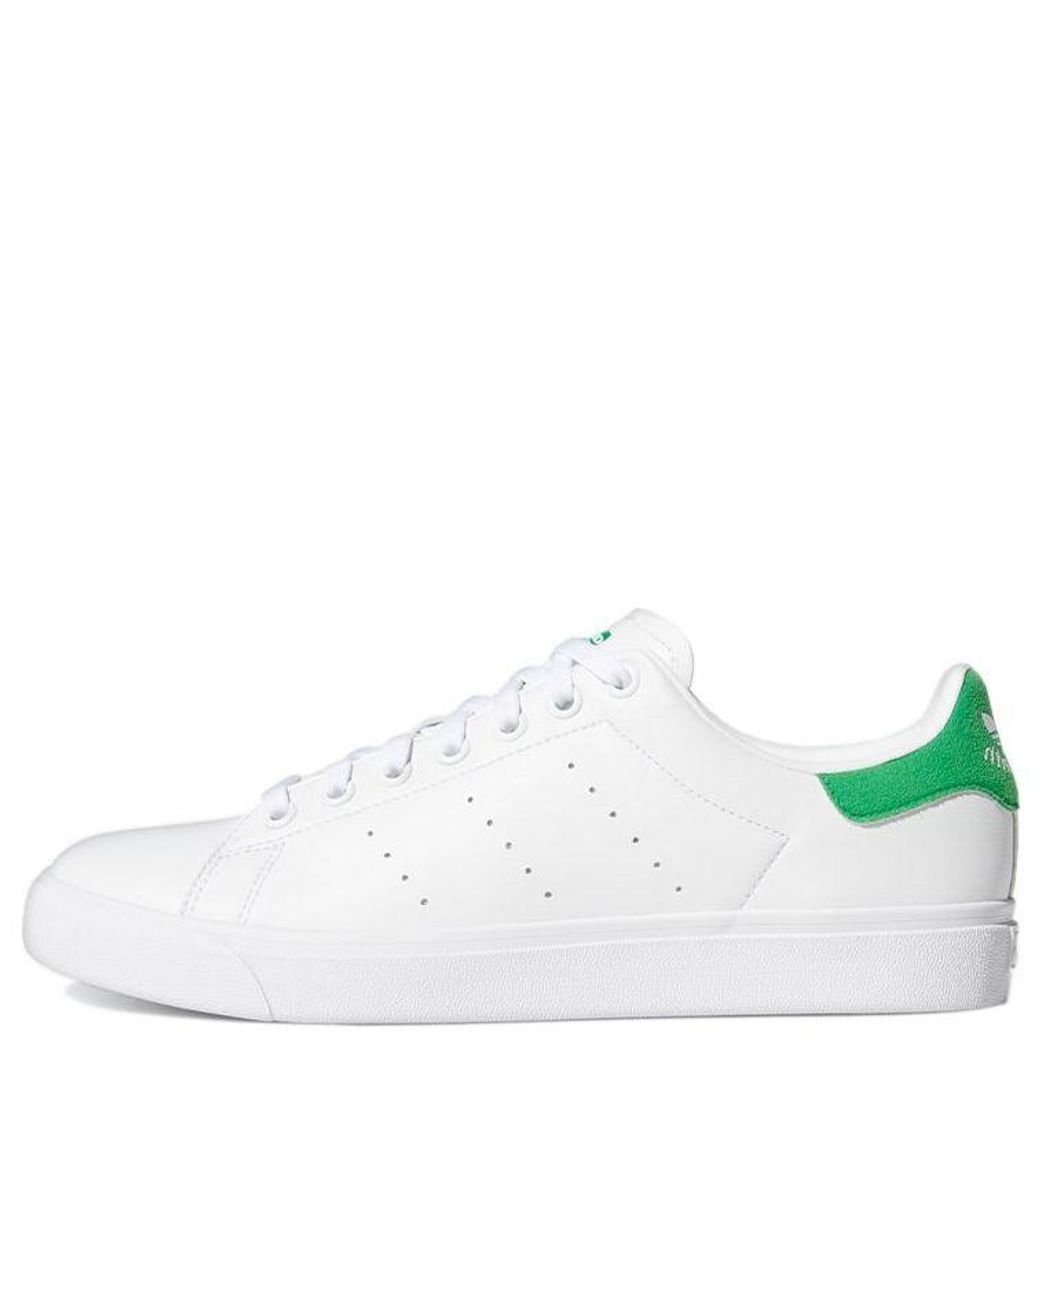 adidas Originals Smith Vulc Shoes White/green for Men Lyst